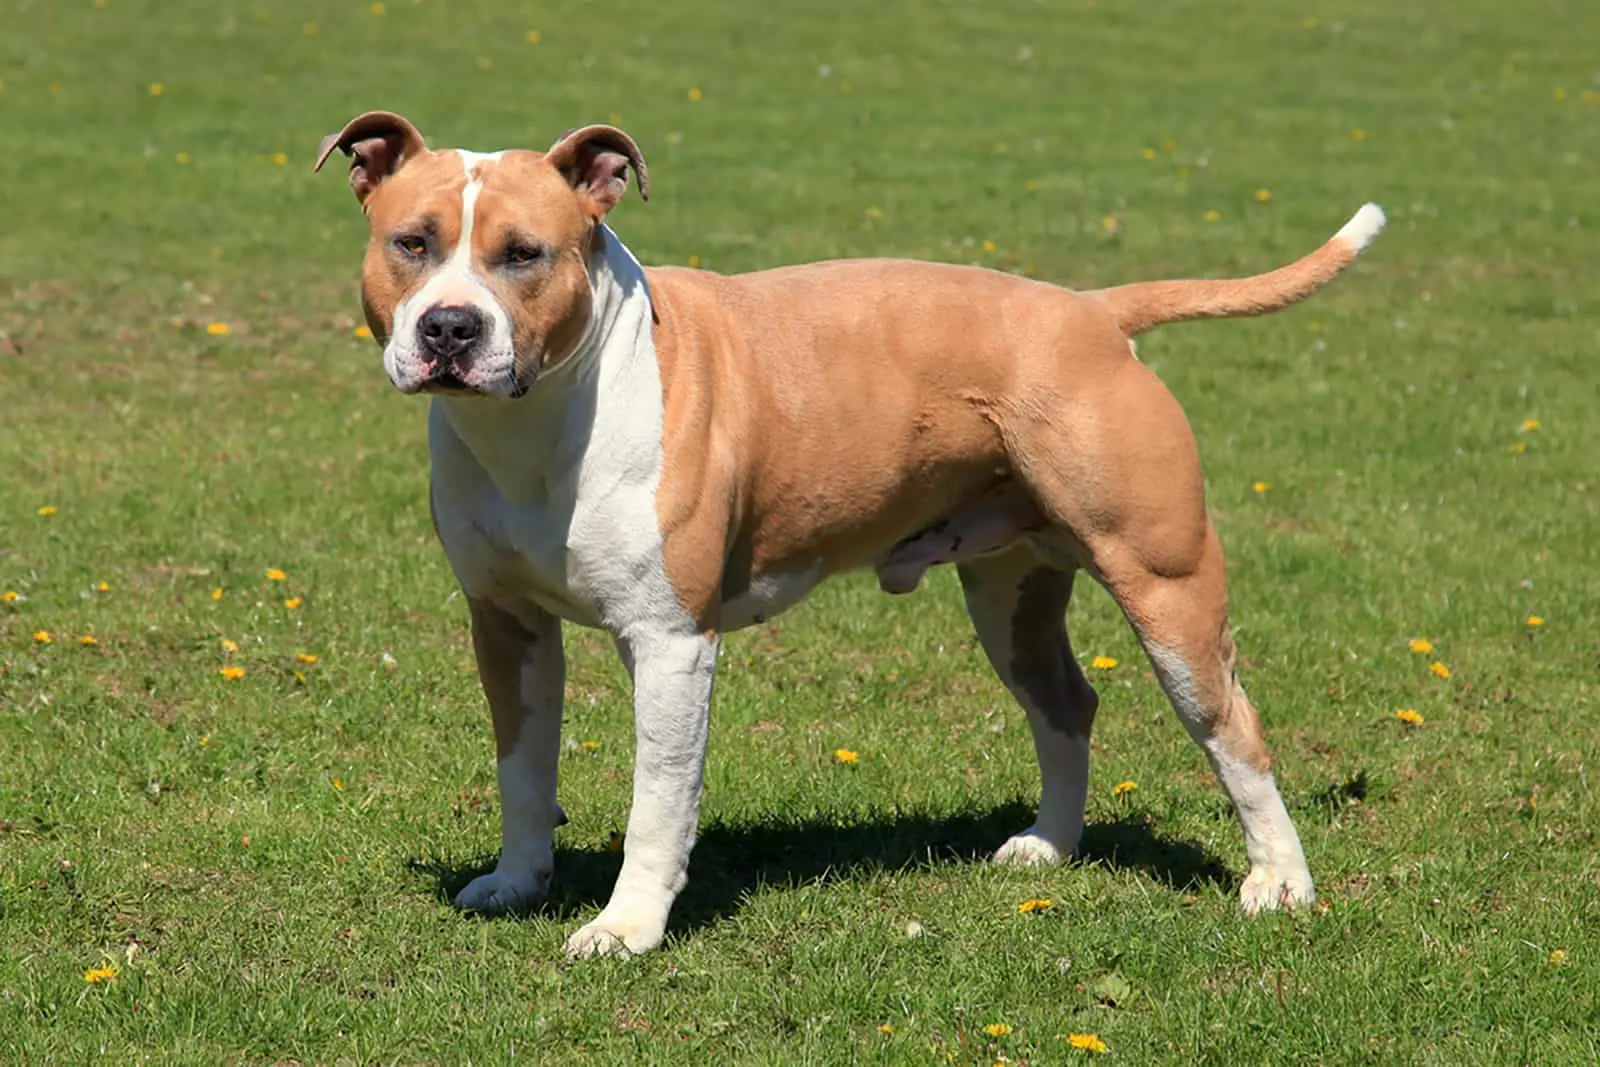 American Staffordshire Terrier standing on a lawn